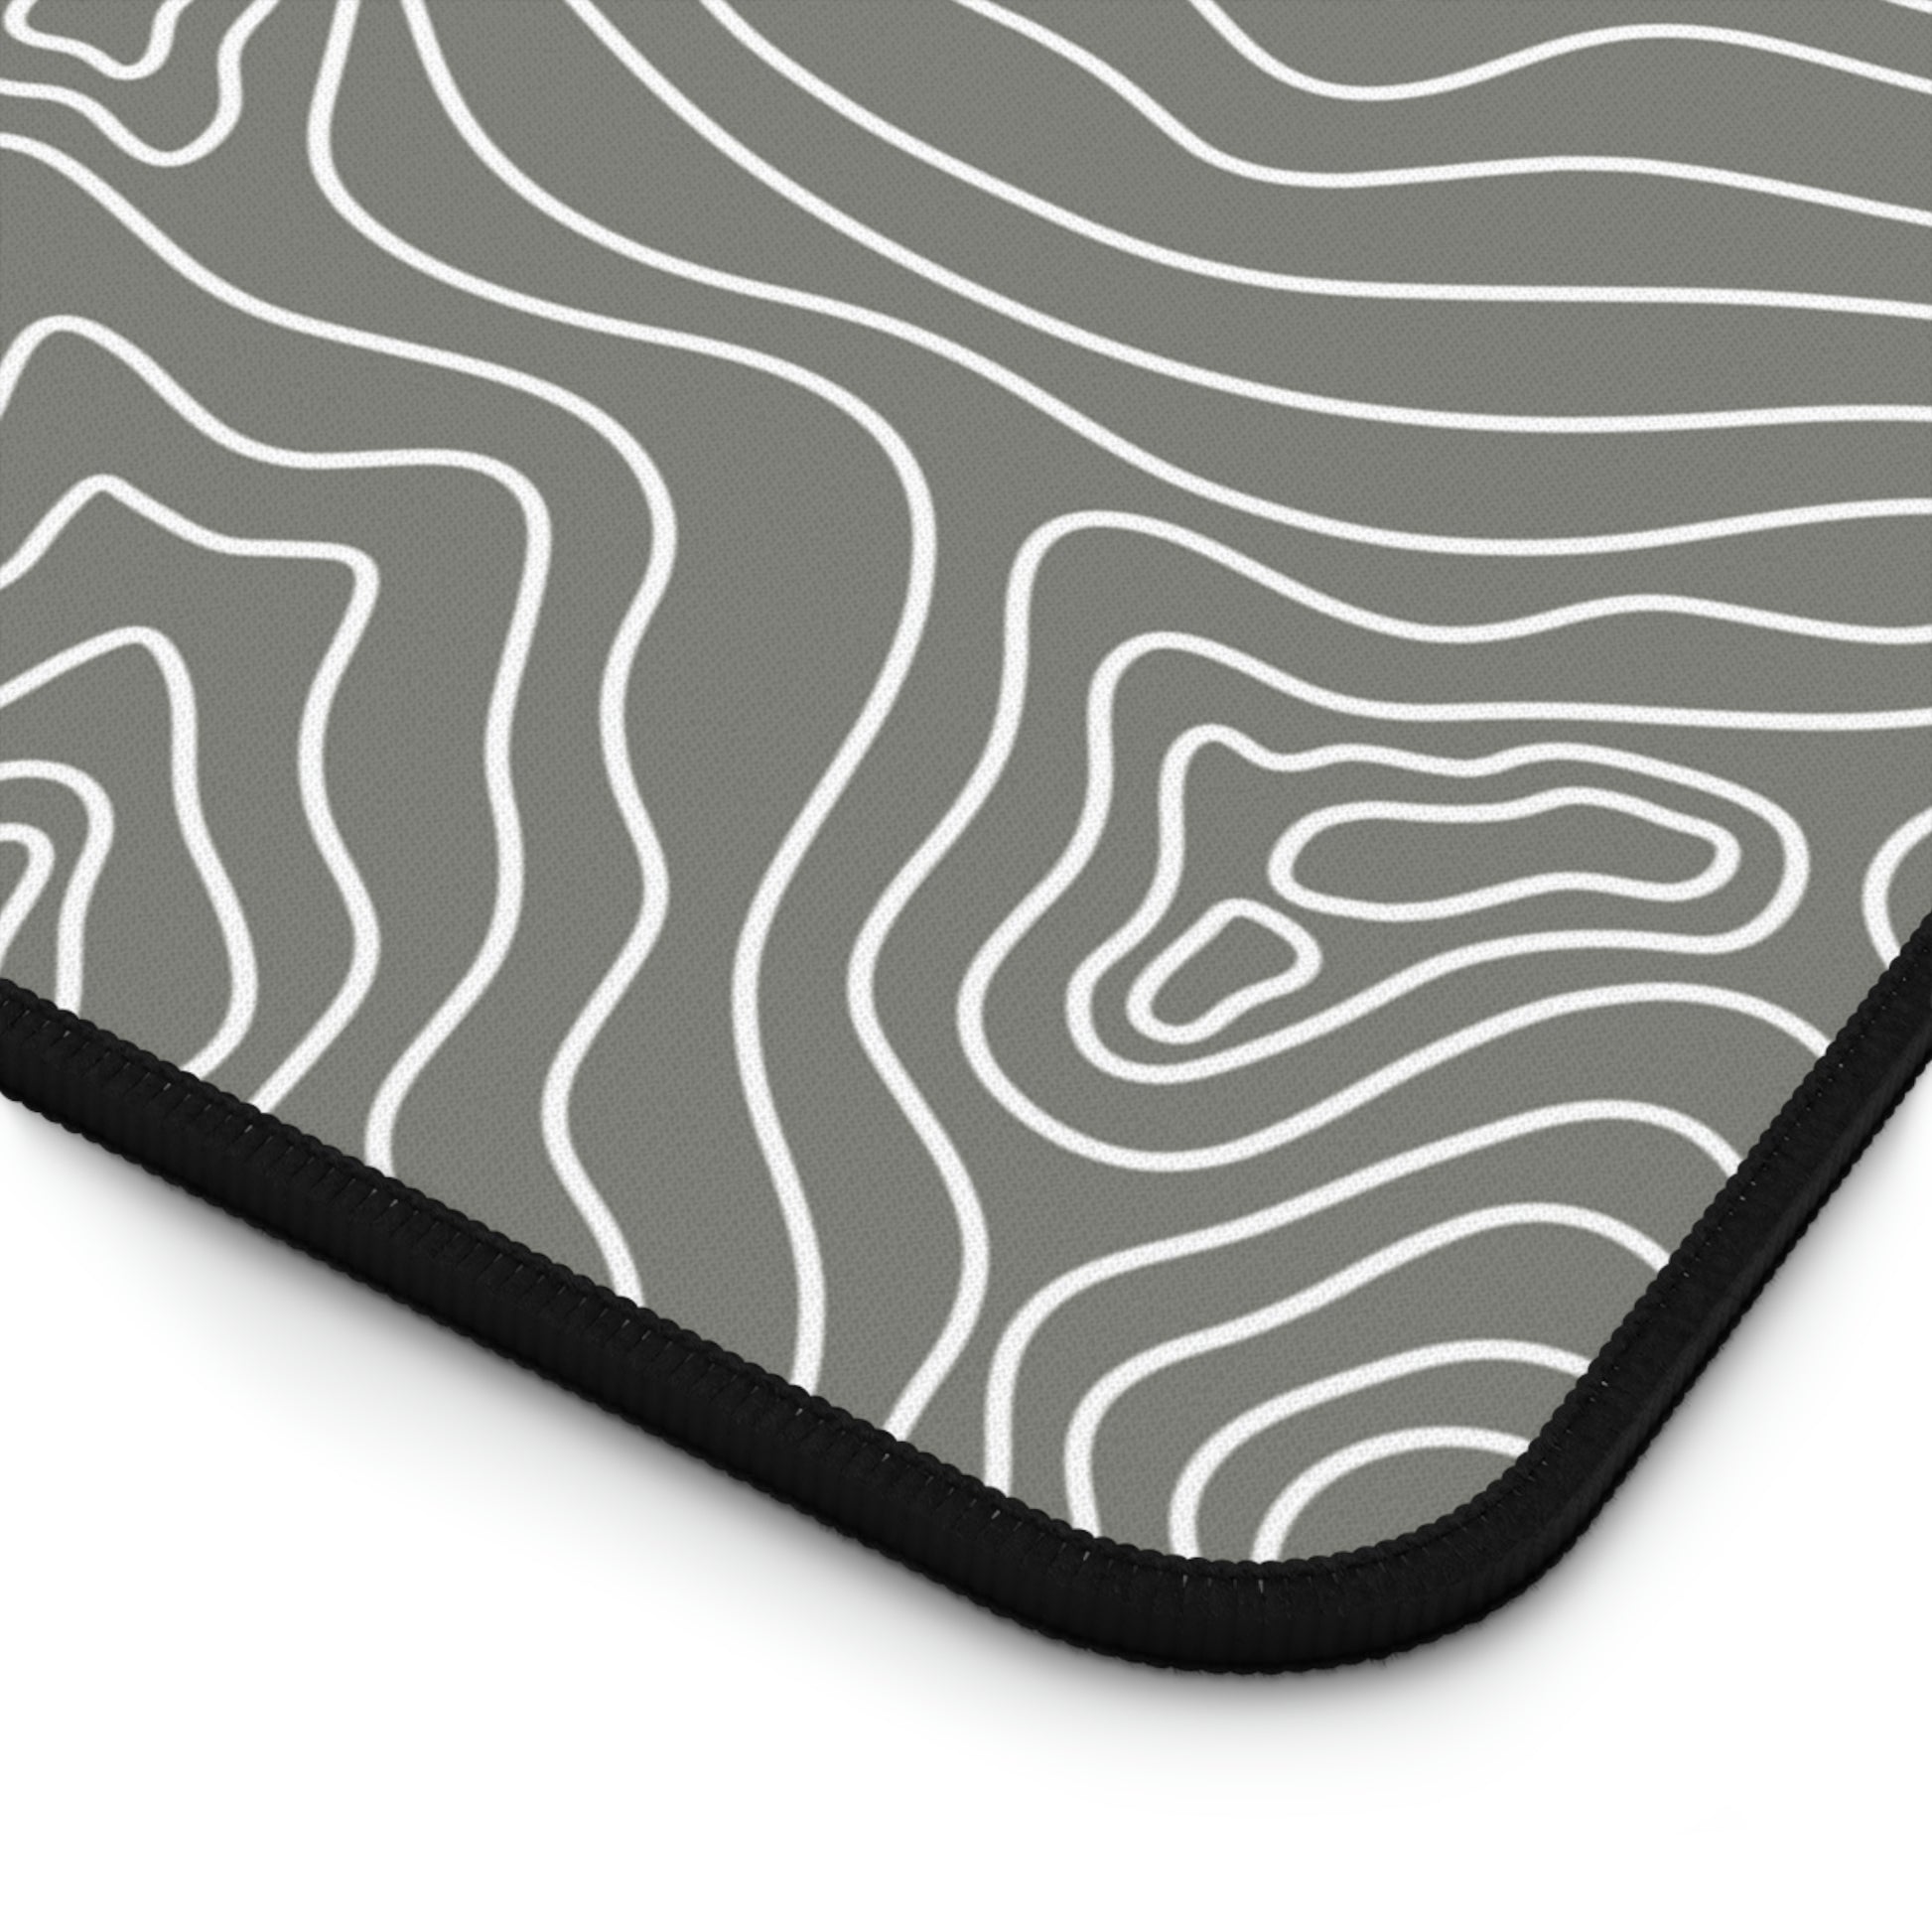 The bottom right corner of a 12" x 22" gray desk mat with white topographic lines.